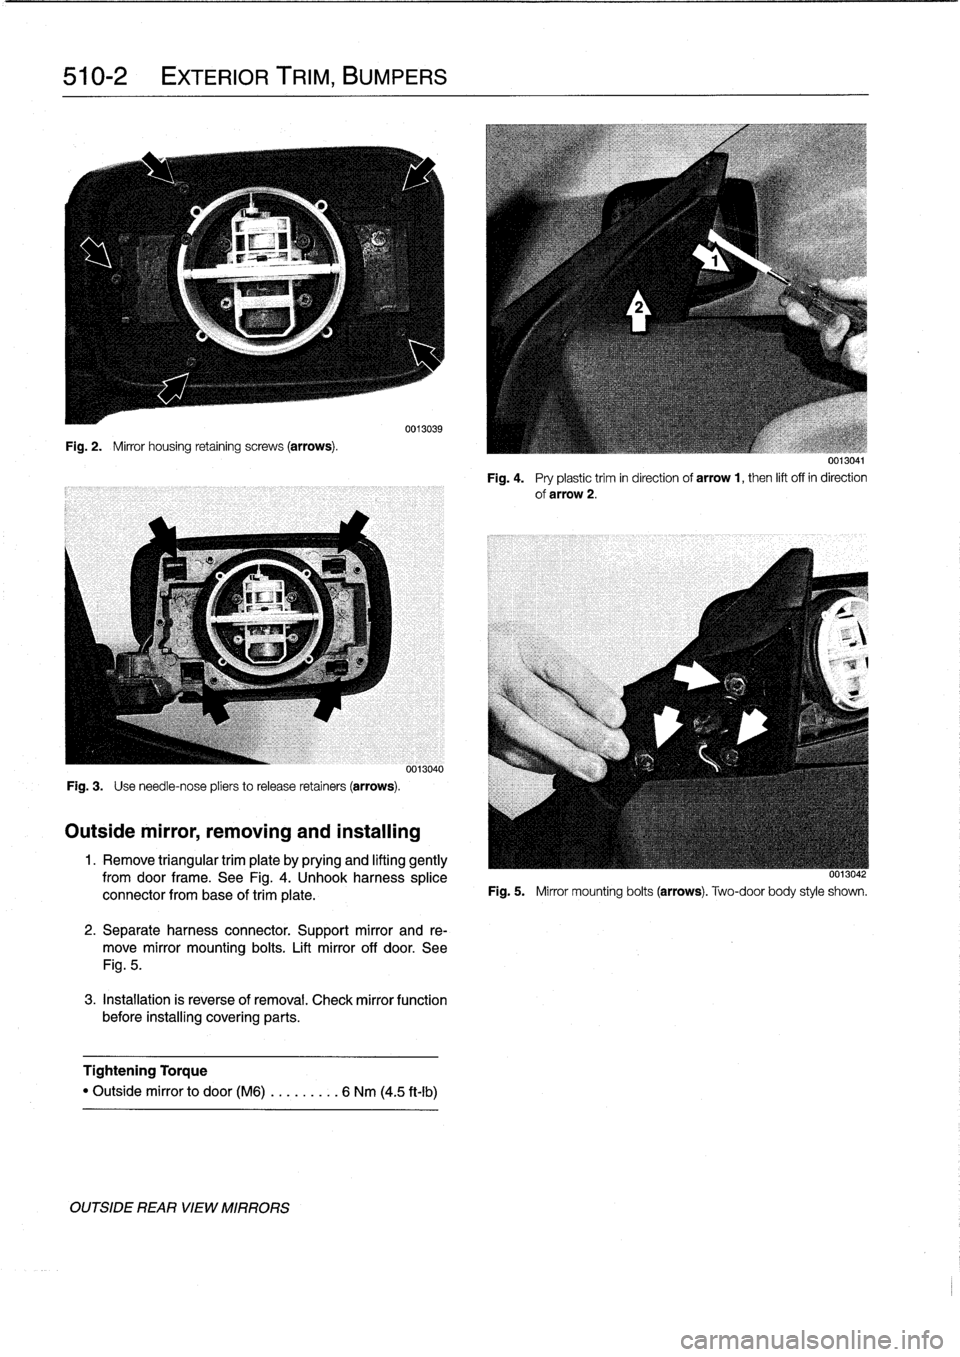 BMW 325i 1993 E36 Workshop Manual 
510-2

	

EXTERIOR
TRIIVI,
BUMPERS

Fig
.
2
.

	

Mirror
housing
retaining
screws
(arrows)
.

Fig
.
3
.

	

Use
need1e-nose
pliers
to
release
retainers
(arrows)
.

Outside
mirror,
removing
and
instal